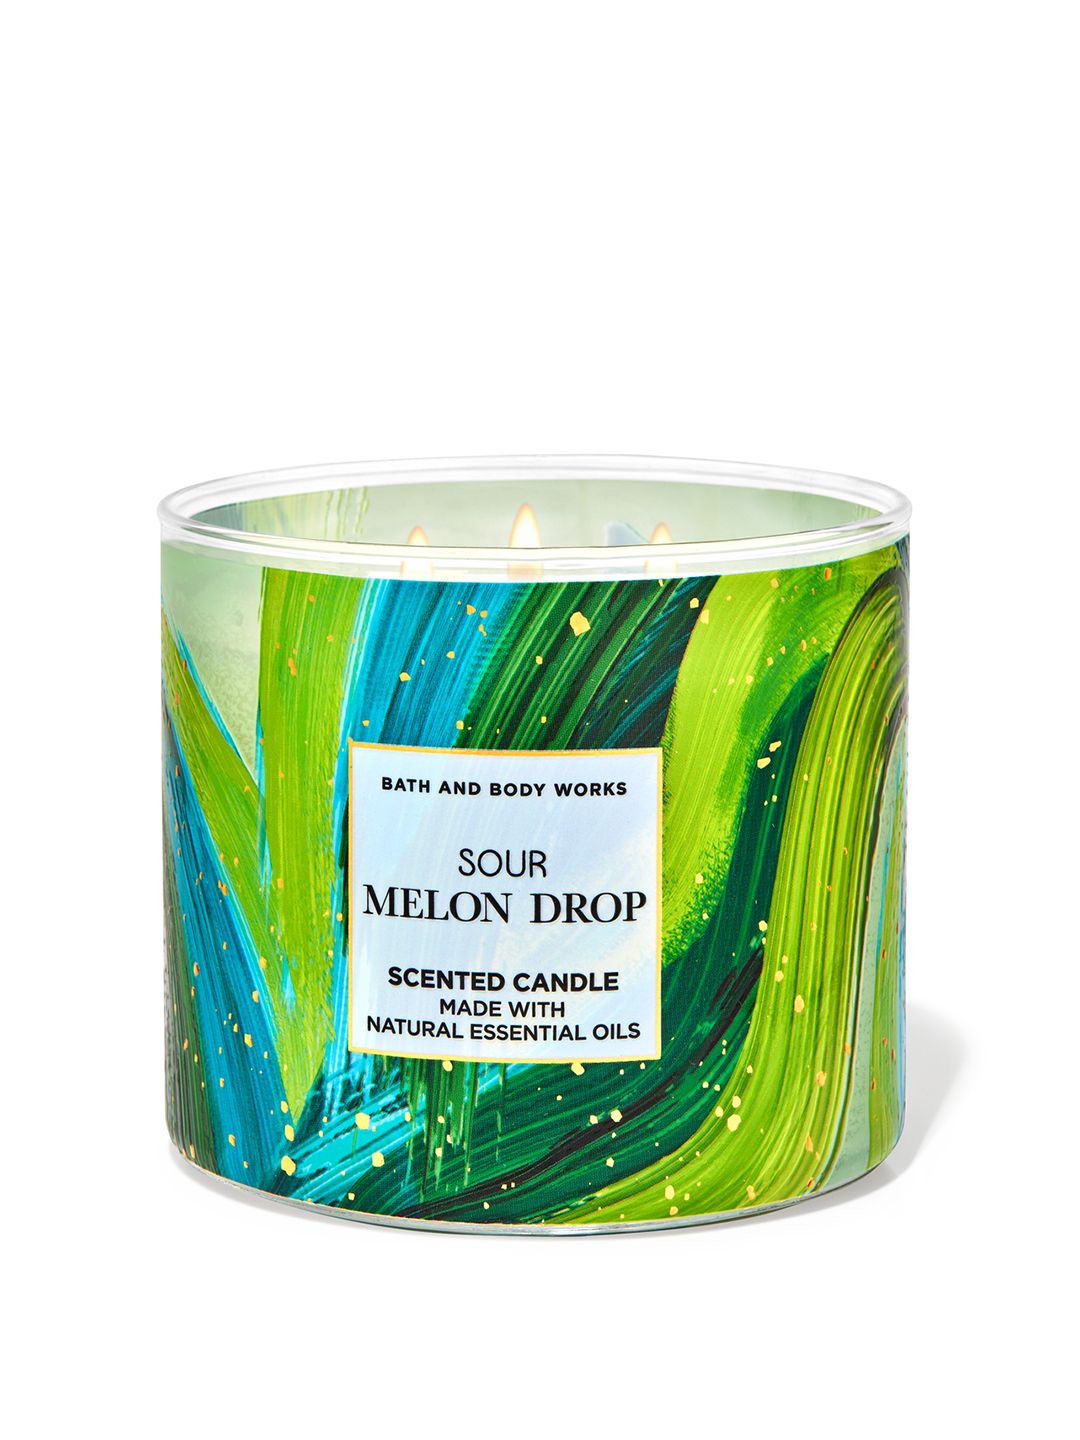 Bath & Body Works Sour Melon Drop 3-Wick Scented Candle with Natural Essential Oils - 411g Price in India